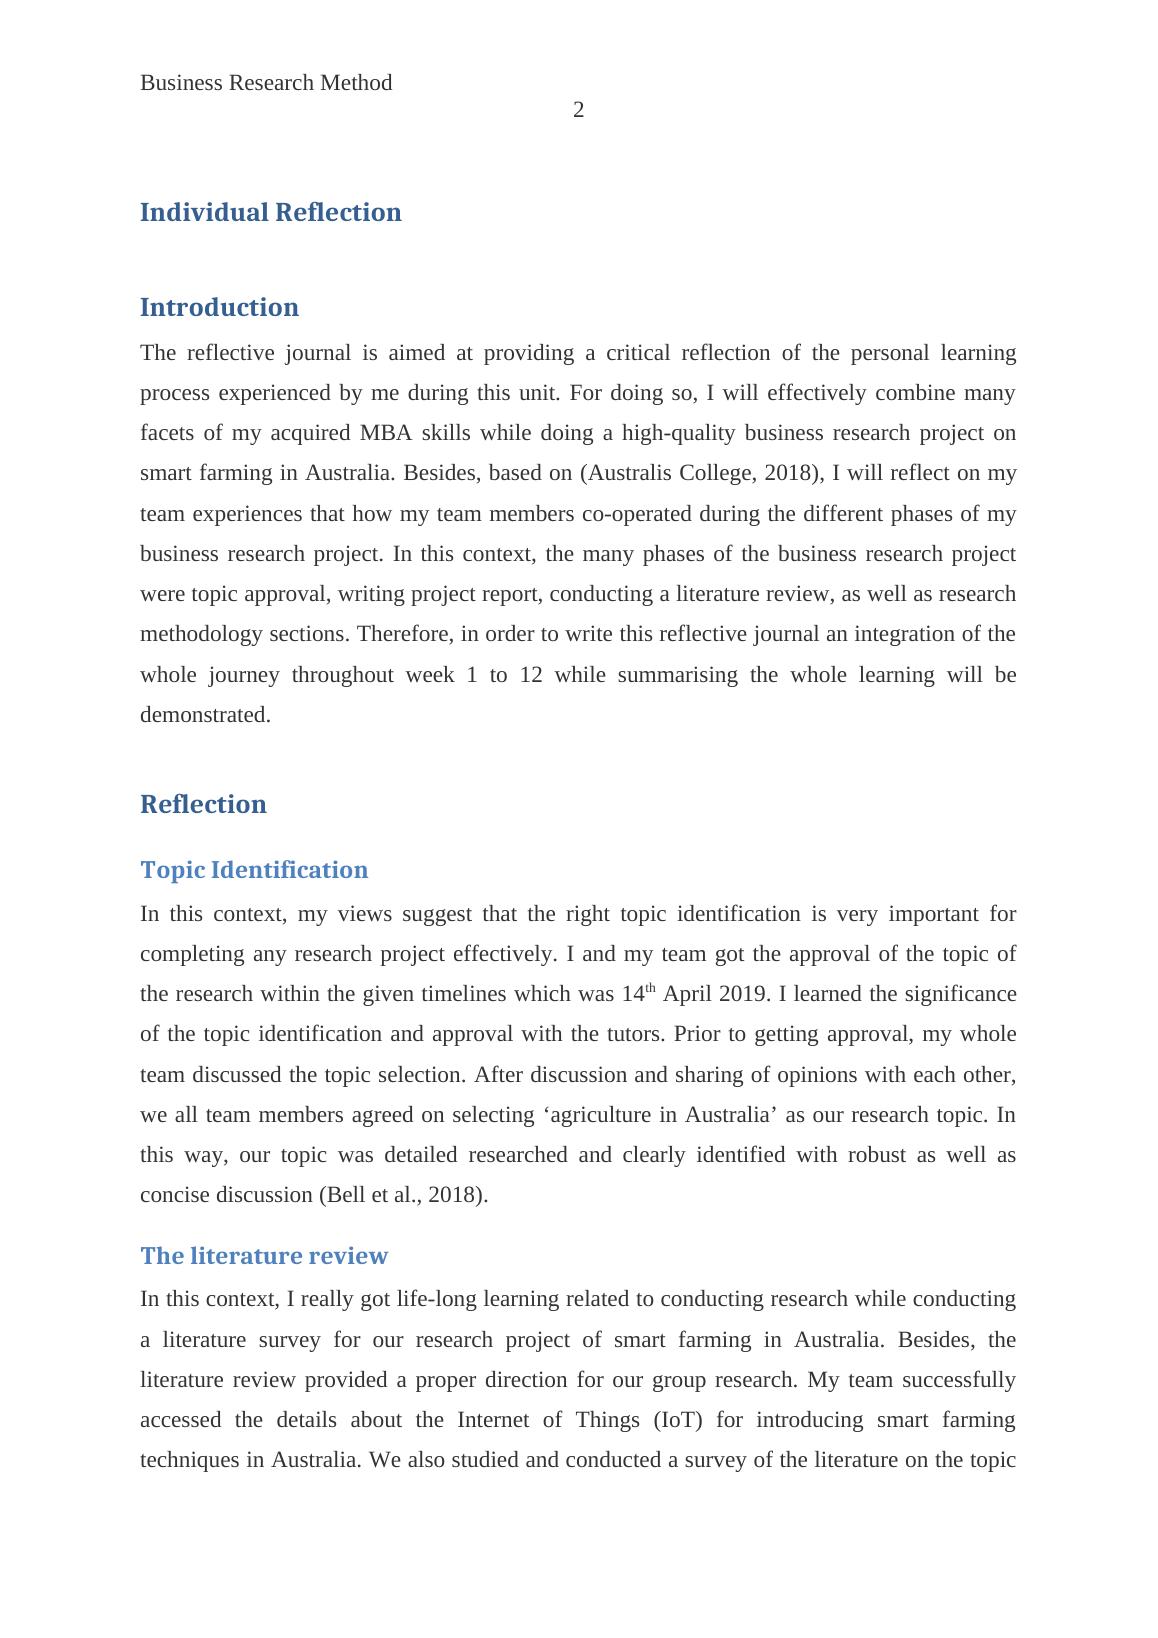 Business Research Method - Individual Reflection Journal_3